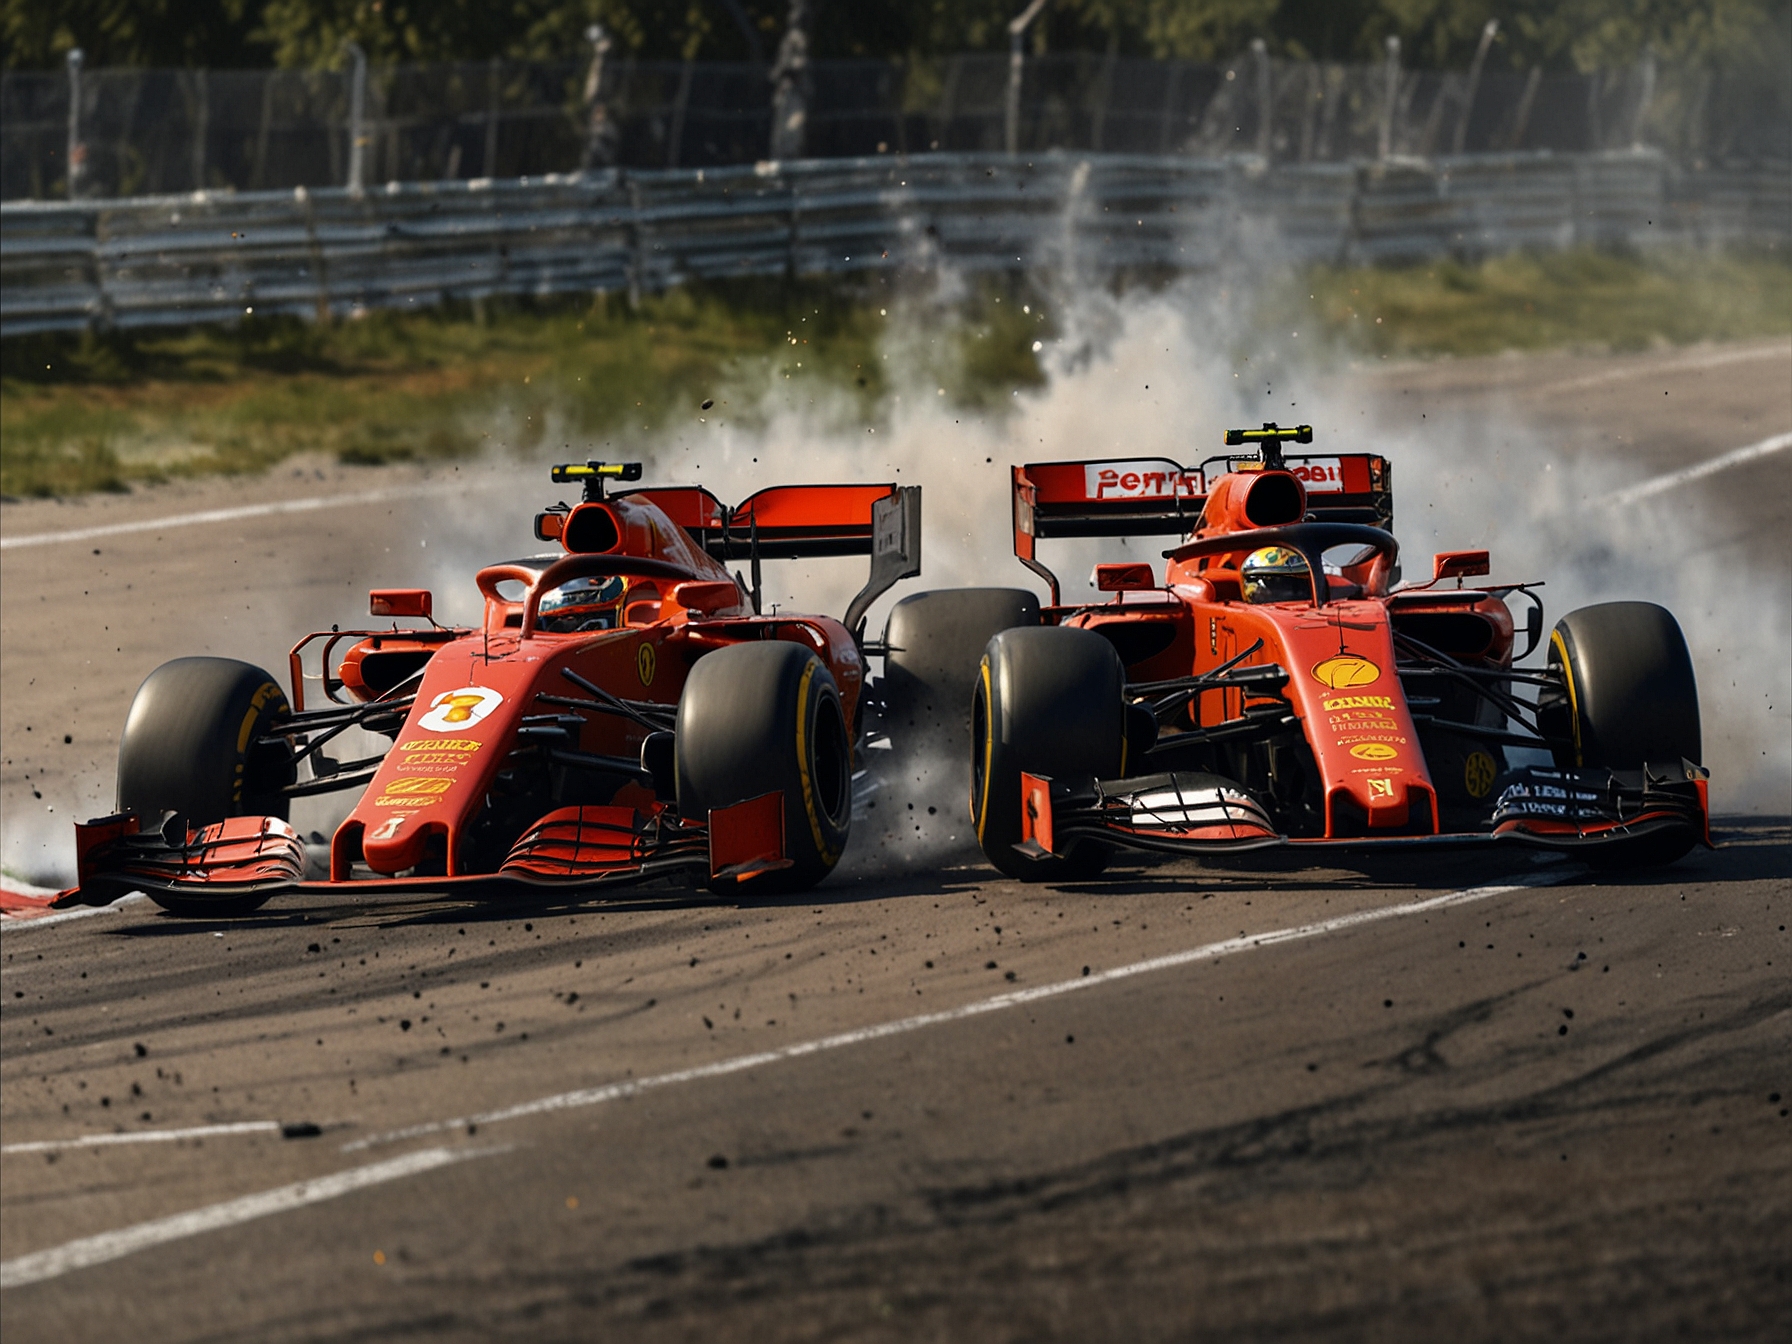 Charles Leclerc (Ferrari) and Lando Norris (McLaren) in the intense moment of collision during the Spanish Grand Prix, showcasing the razor-thin margins and high stakes of Formula 1 racing.